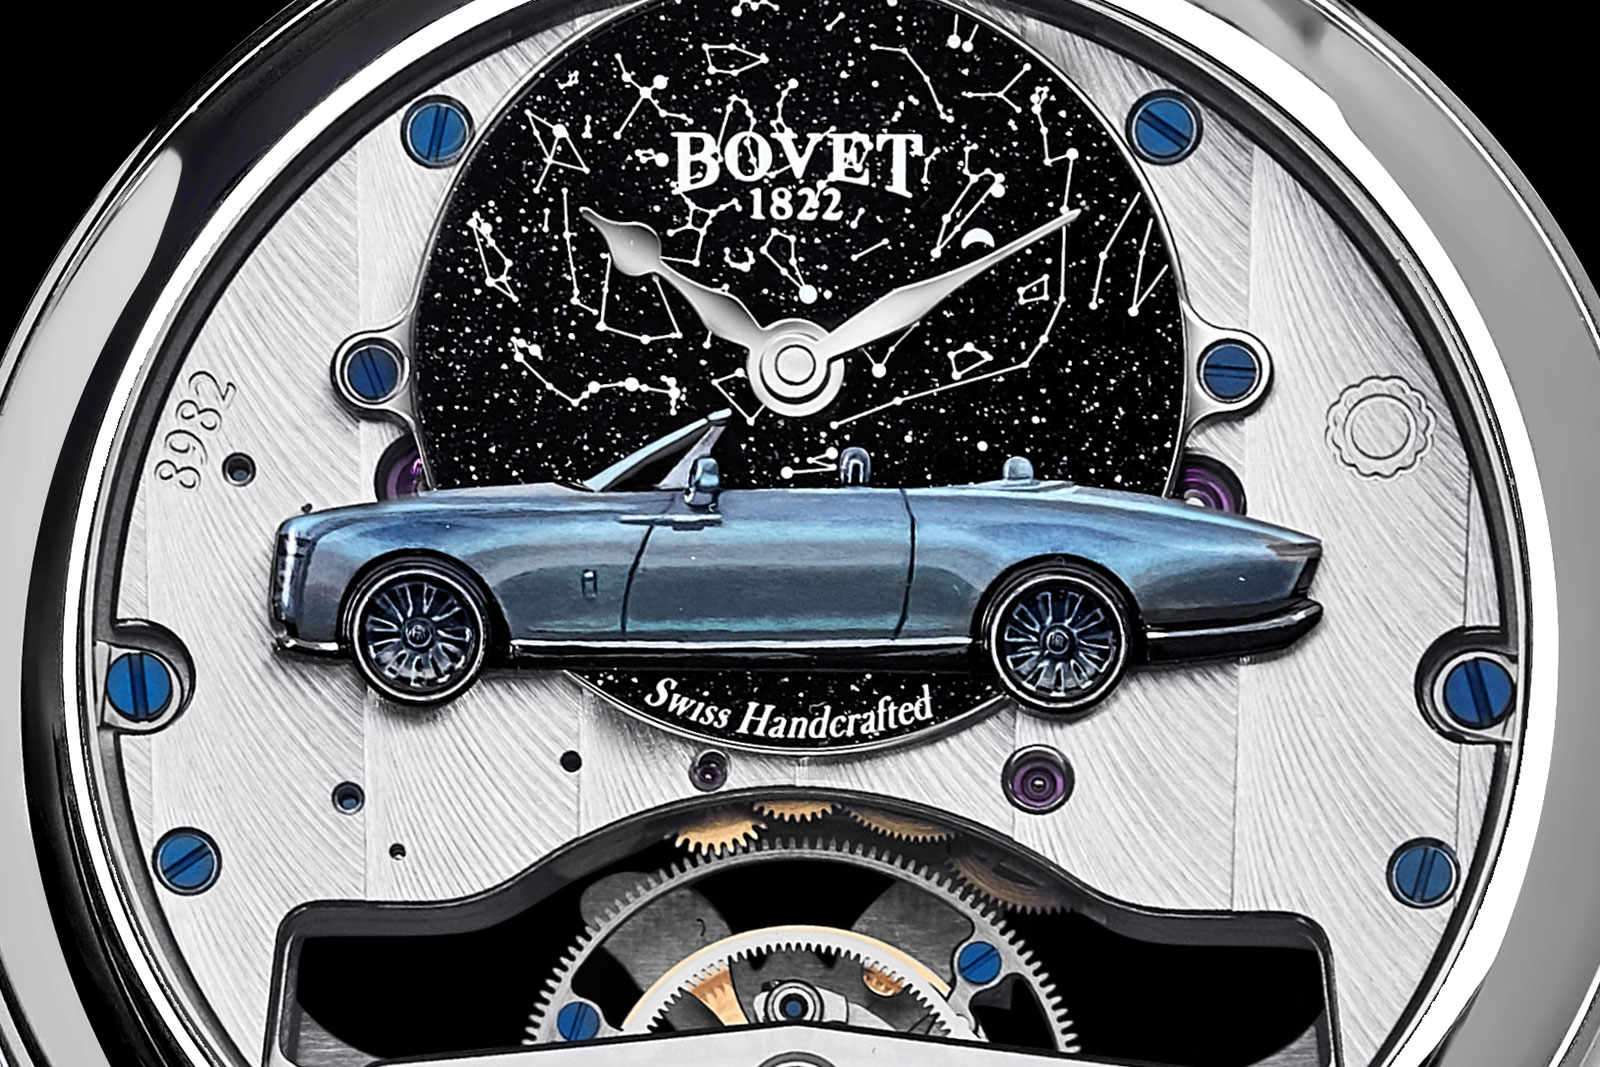 Franck Muller and RollsRoyce Geneva make unique cars and watches together